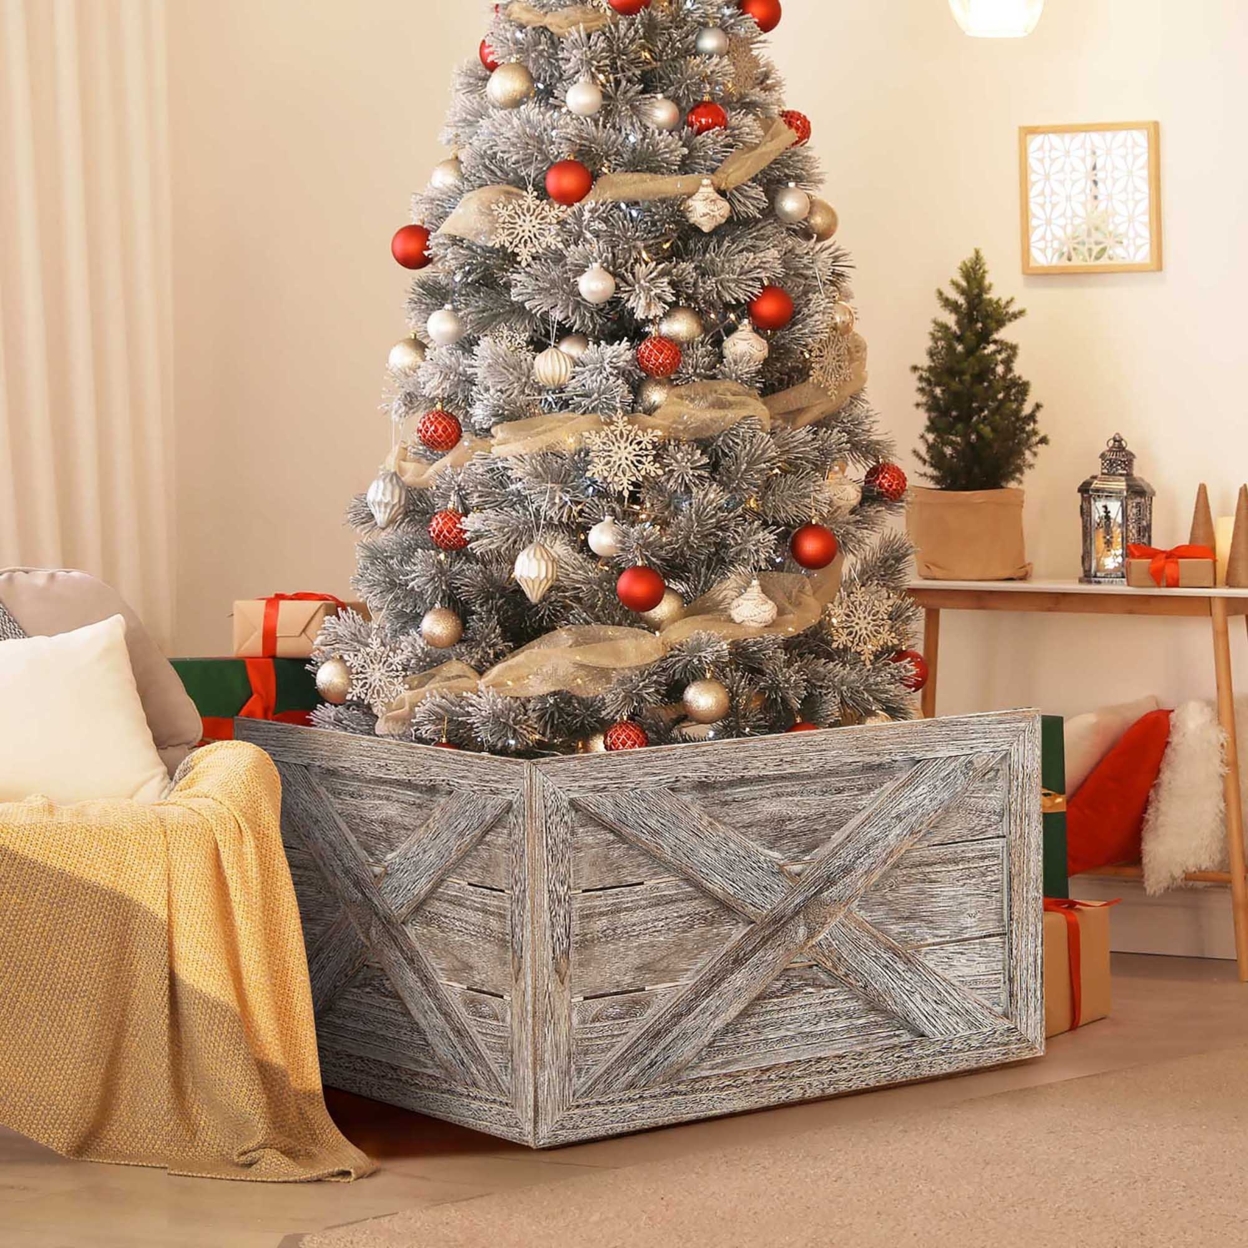 37 X 27 Inches Solid Wooden Christmas Tree Box W/ Hook & Loop Fasteners - Grey